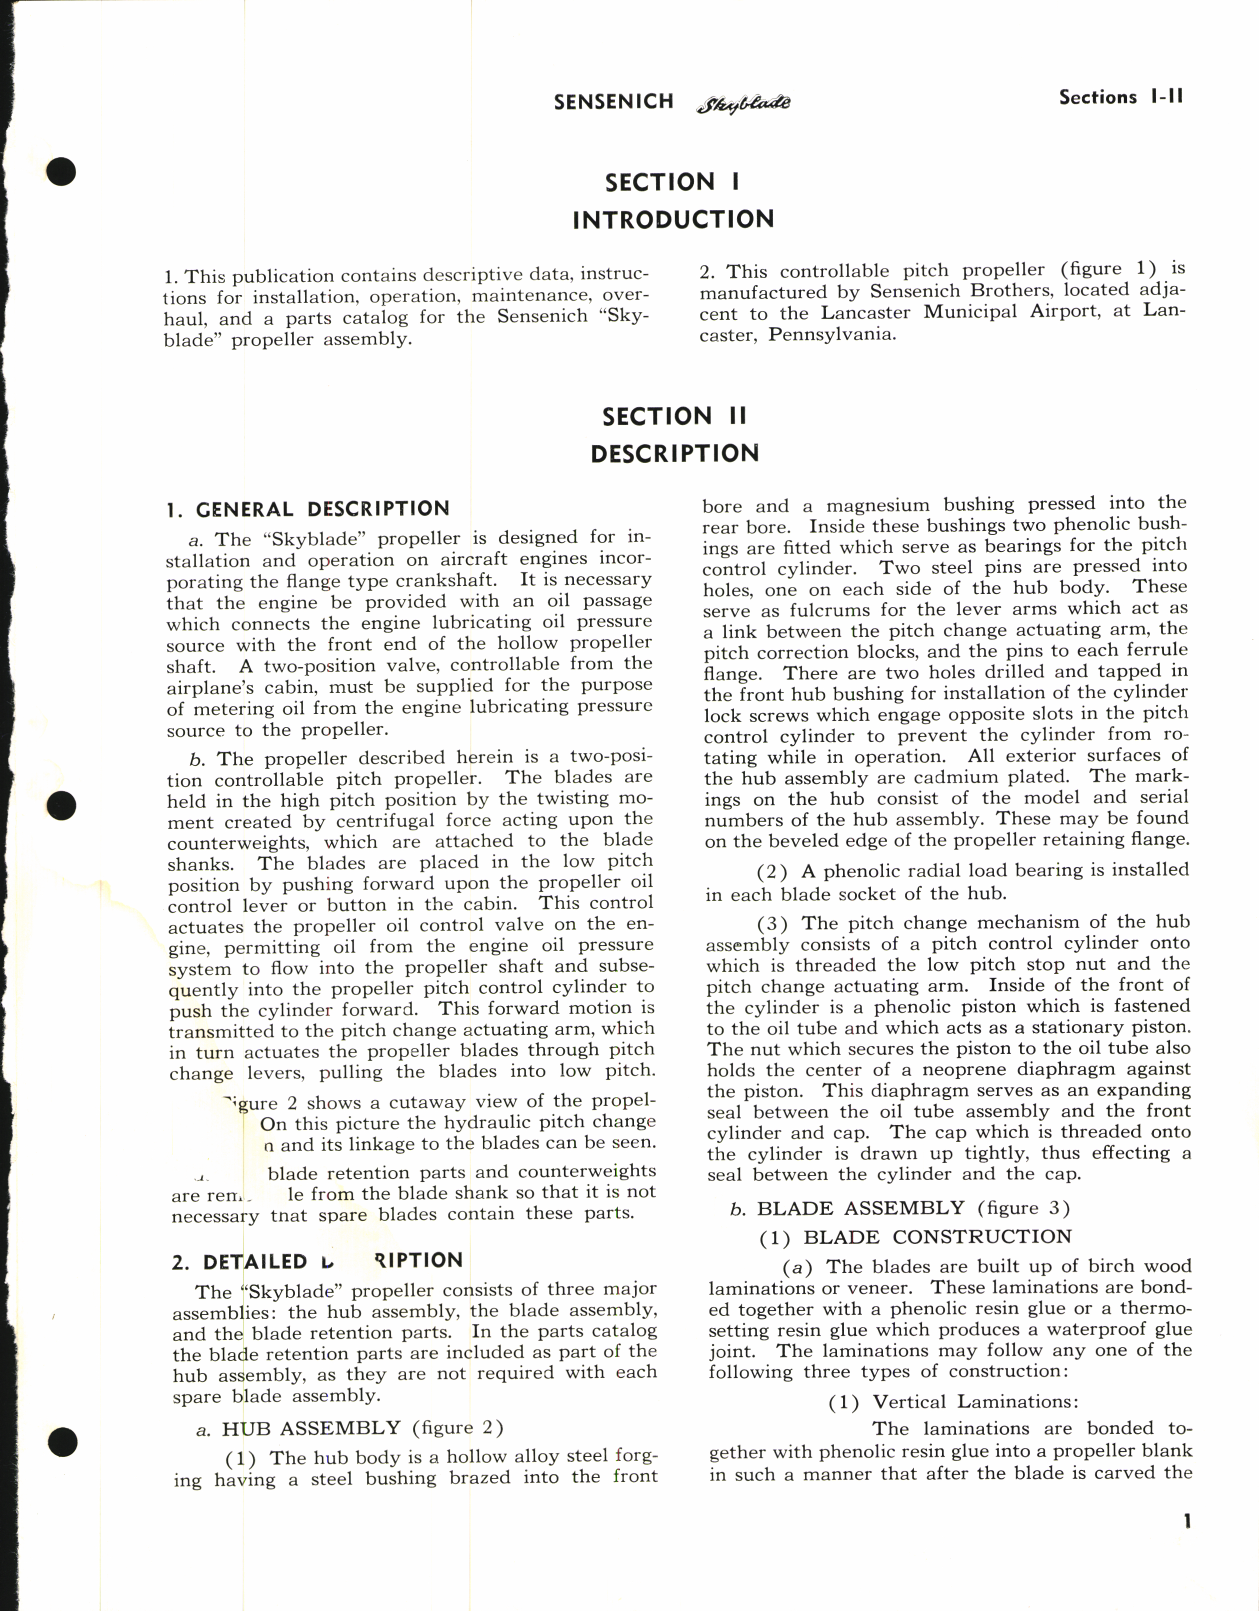 Sample page 5 from AirCorps Library document: Handbook of Instructions and Parts Catalog for Hydraulically Operated Controllable Pitch Propeller